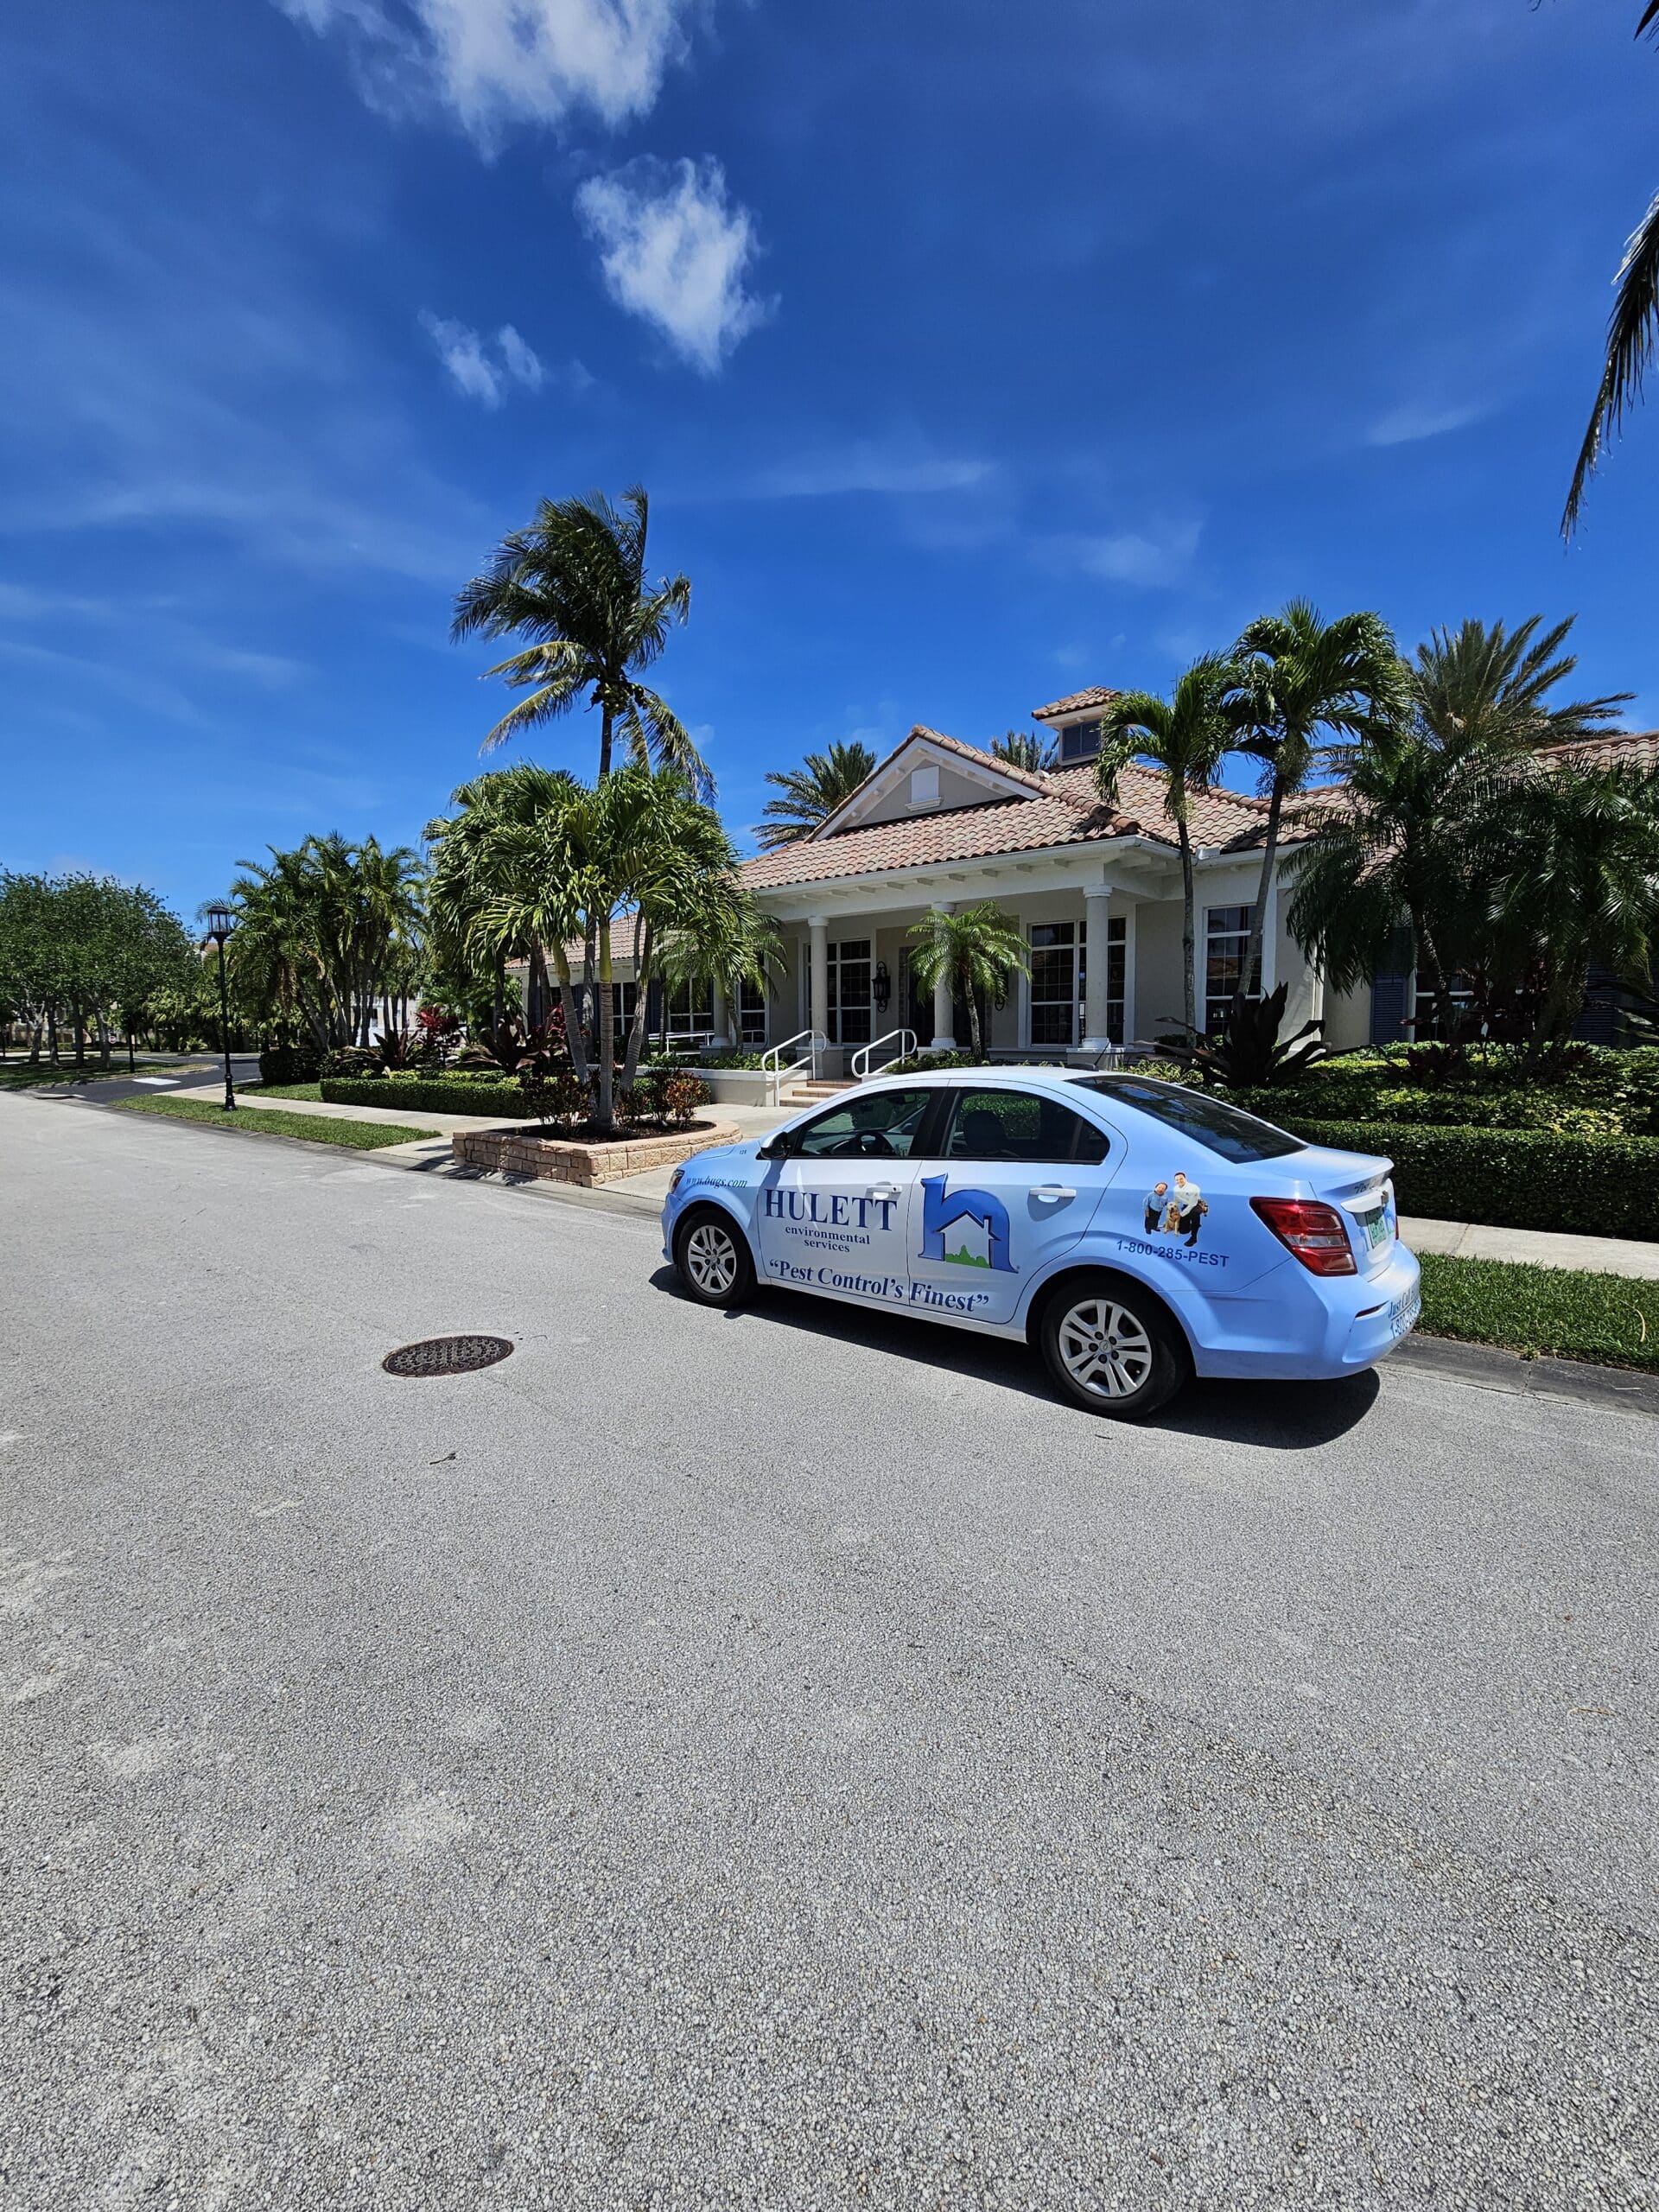 Hulett service car parked in a Vero Beach driveway to provide pest control services.